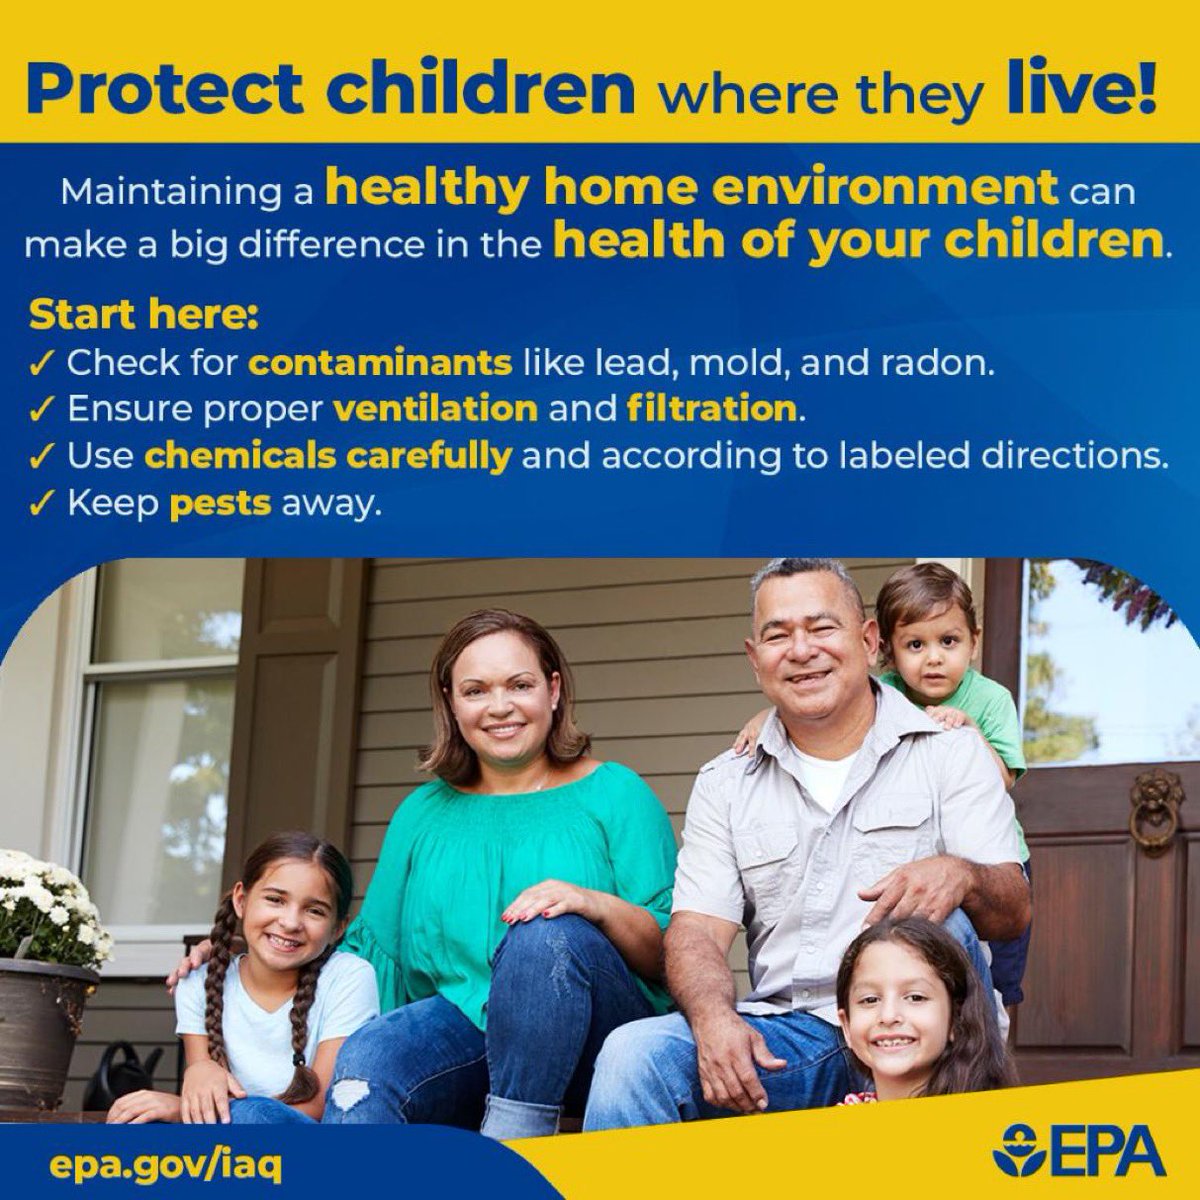 Looking for ways to inform others about National Lead Poisoning Prevention Week from October 22–28, 2023? #CDCgov, #HUDgov and #EPA have developed an information kit, social media messaging, and other resources: bit.ly/3PIRLIN
#NLPPW2023  
#LeadFreeKids